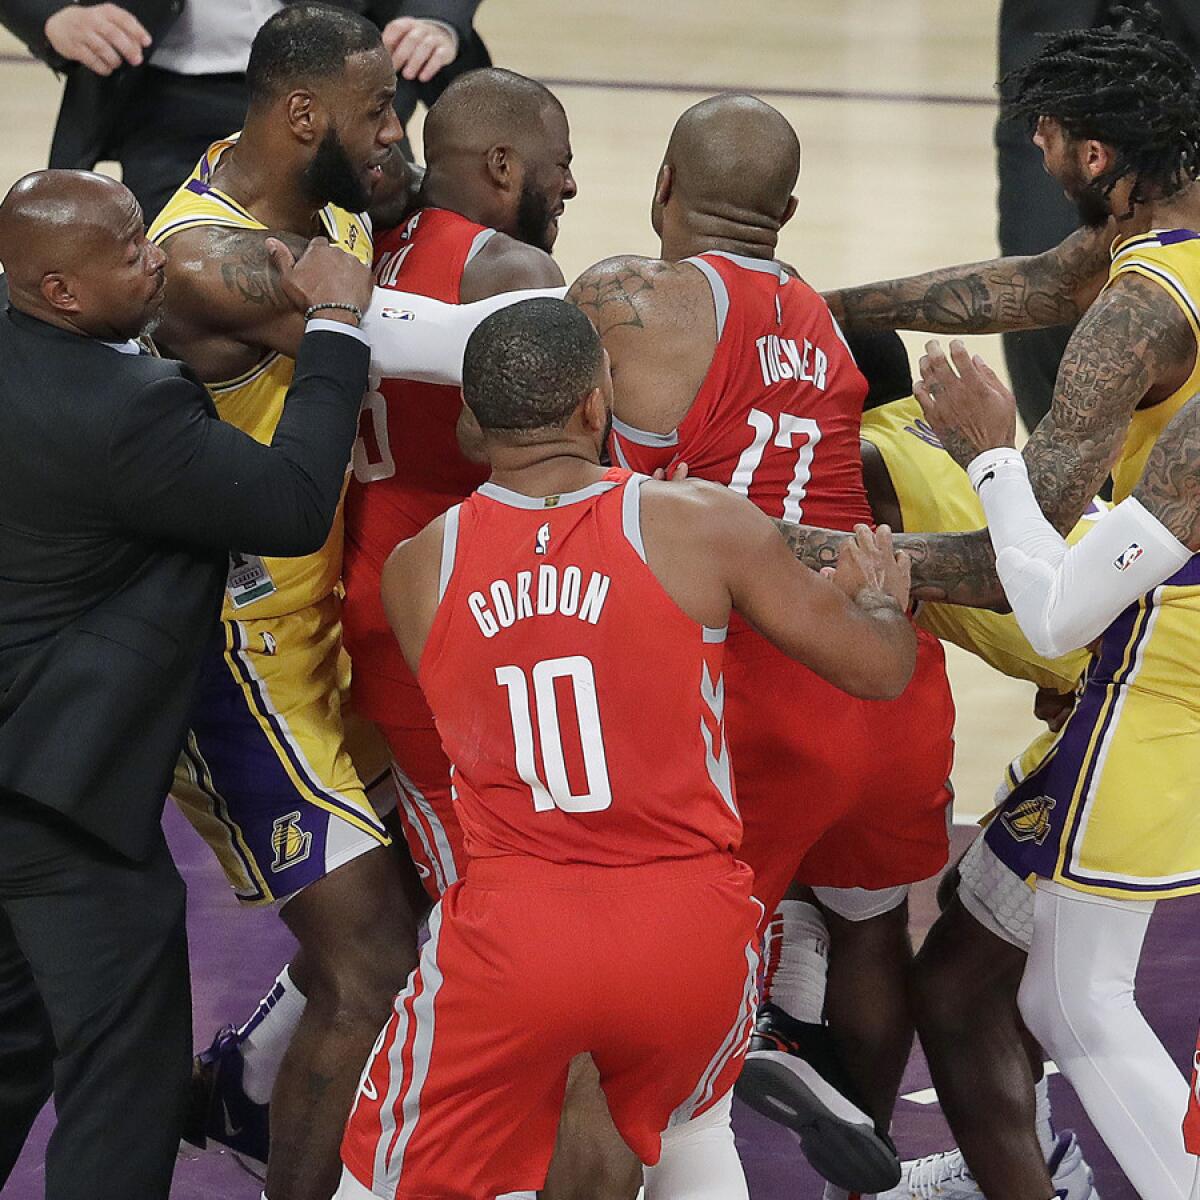 Players try to separate Chris Paul and Rajon Rondo after Paul appeared to poke Rondo in the face as they exchanged words on Saturday at Staples Center.